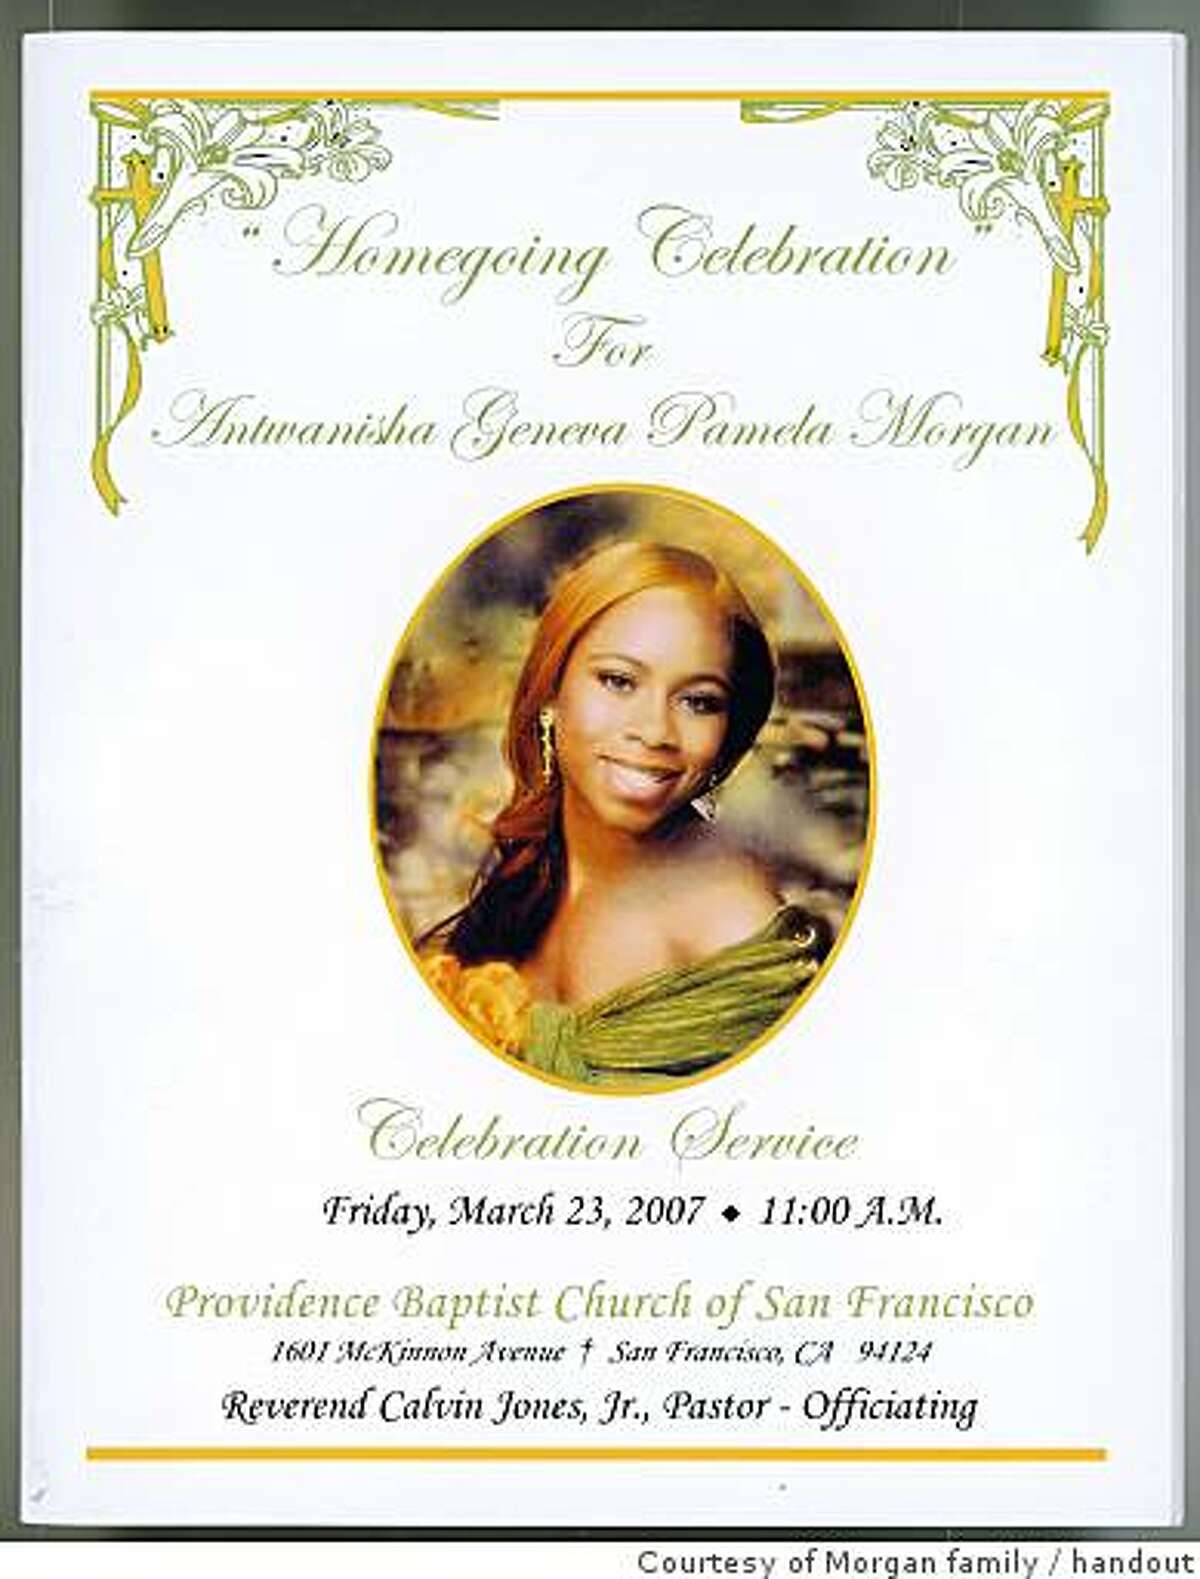 Antwanisha Morgan was 17 when she was killed March 16, 2007. Ran on: 03-29-2007 Antwanisha Morgan Ran on: 03-30-2007 Antwanisha Morgan, 17, was killed leaving a community center where she volunteered. Ran on: 04-04-2007 Antwanisha Morgan was outside a youth center, dressed in a suit and heels, when she was shot. ALSO Ran on: 10-02-2007 Malika Crosby, with son Jarell Washington (left) and boyfriend, brought new grave decorations.